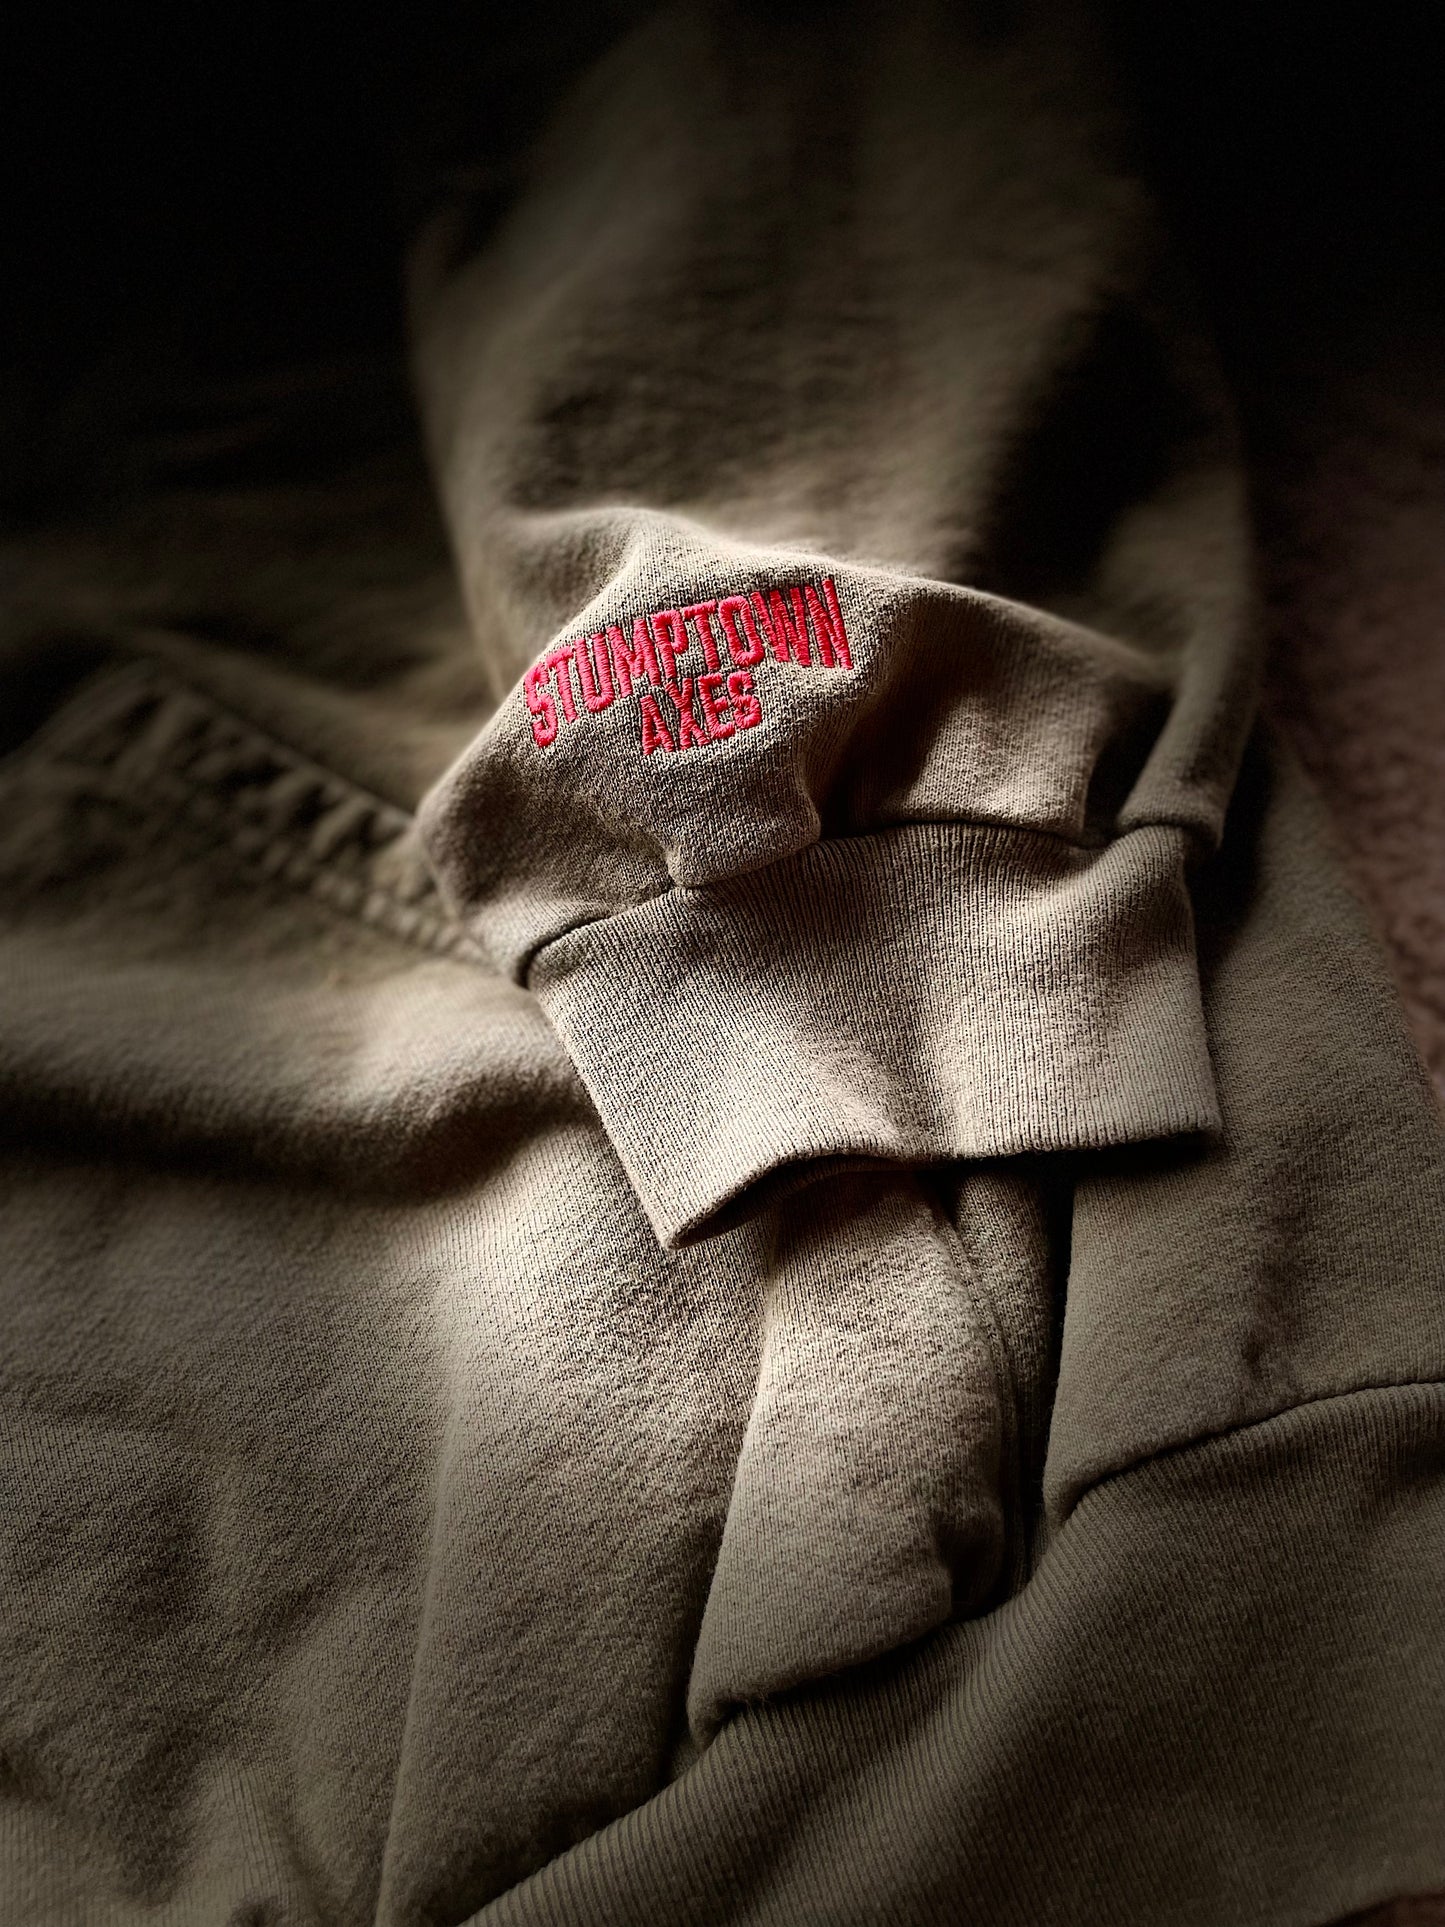 Stumptown Axes Hoodie - Embroidered